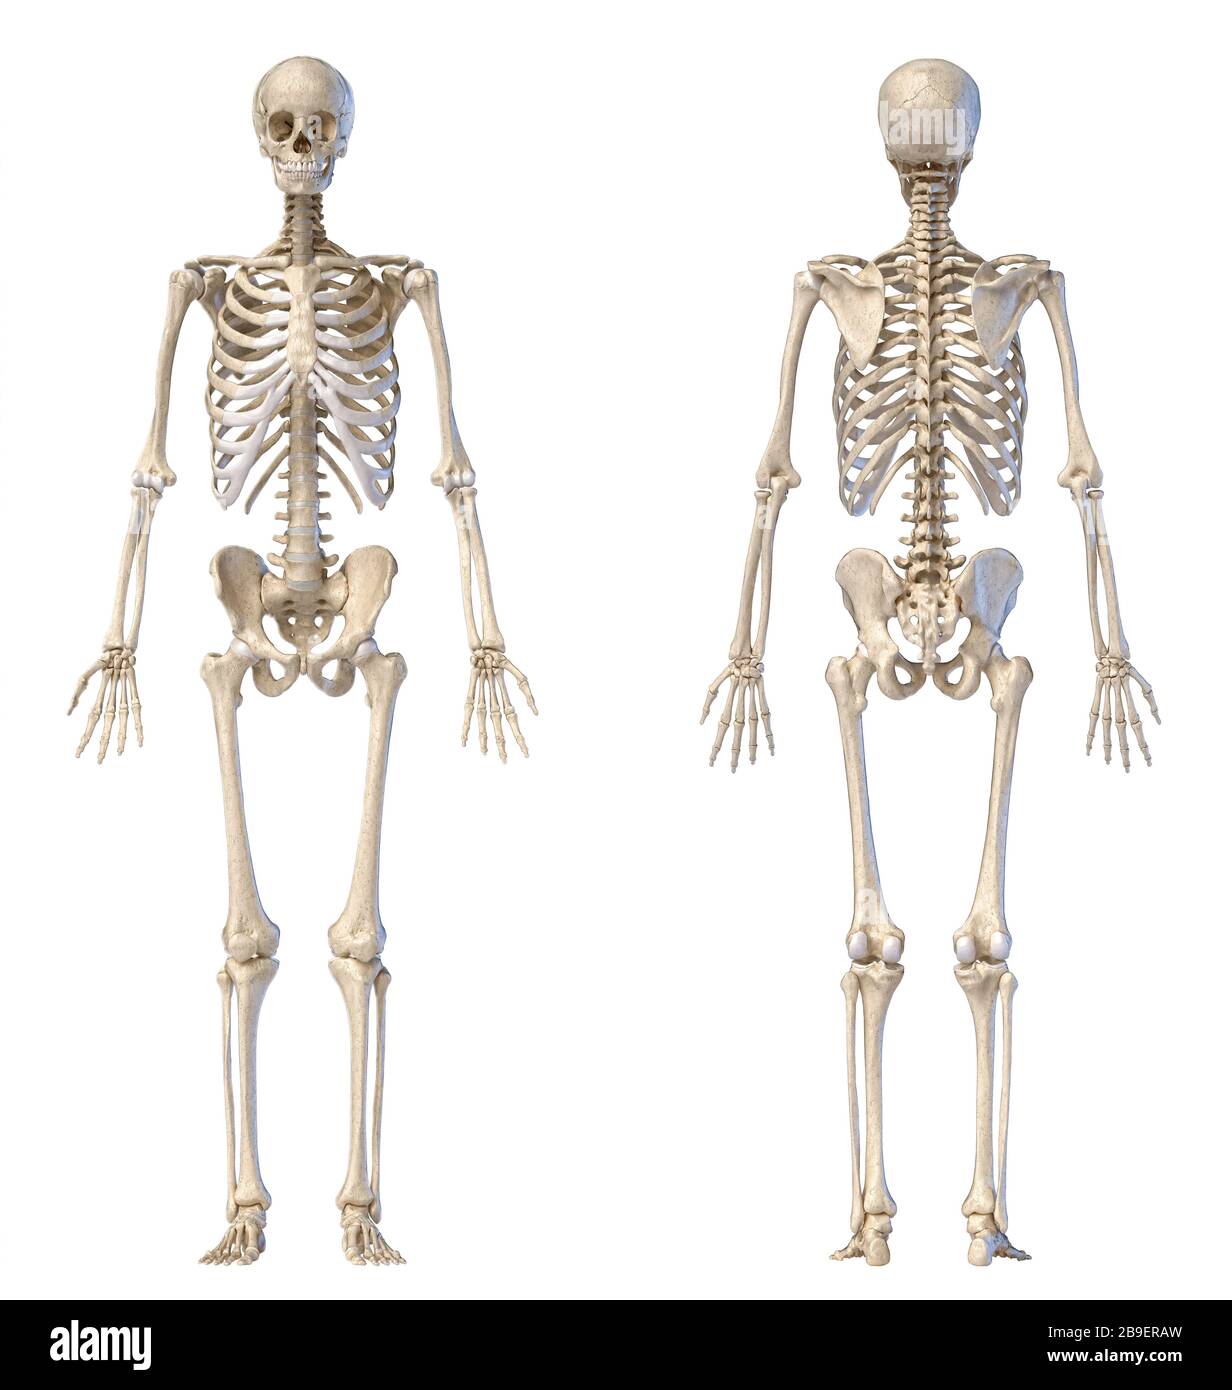 Front and back views of full human skeleton on white background. Stock Photo